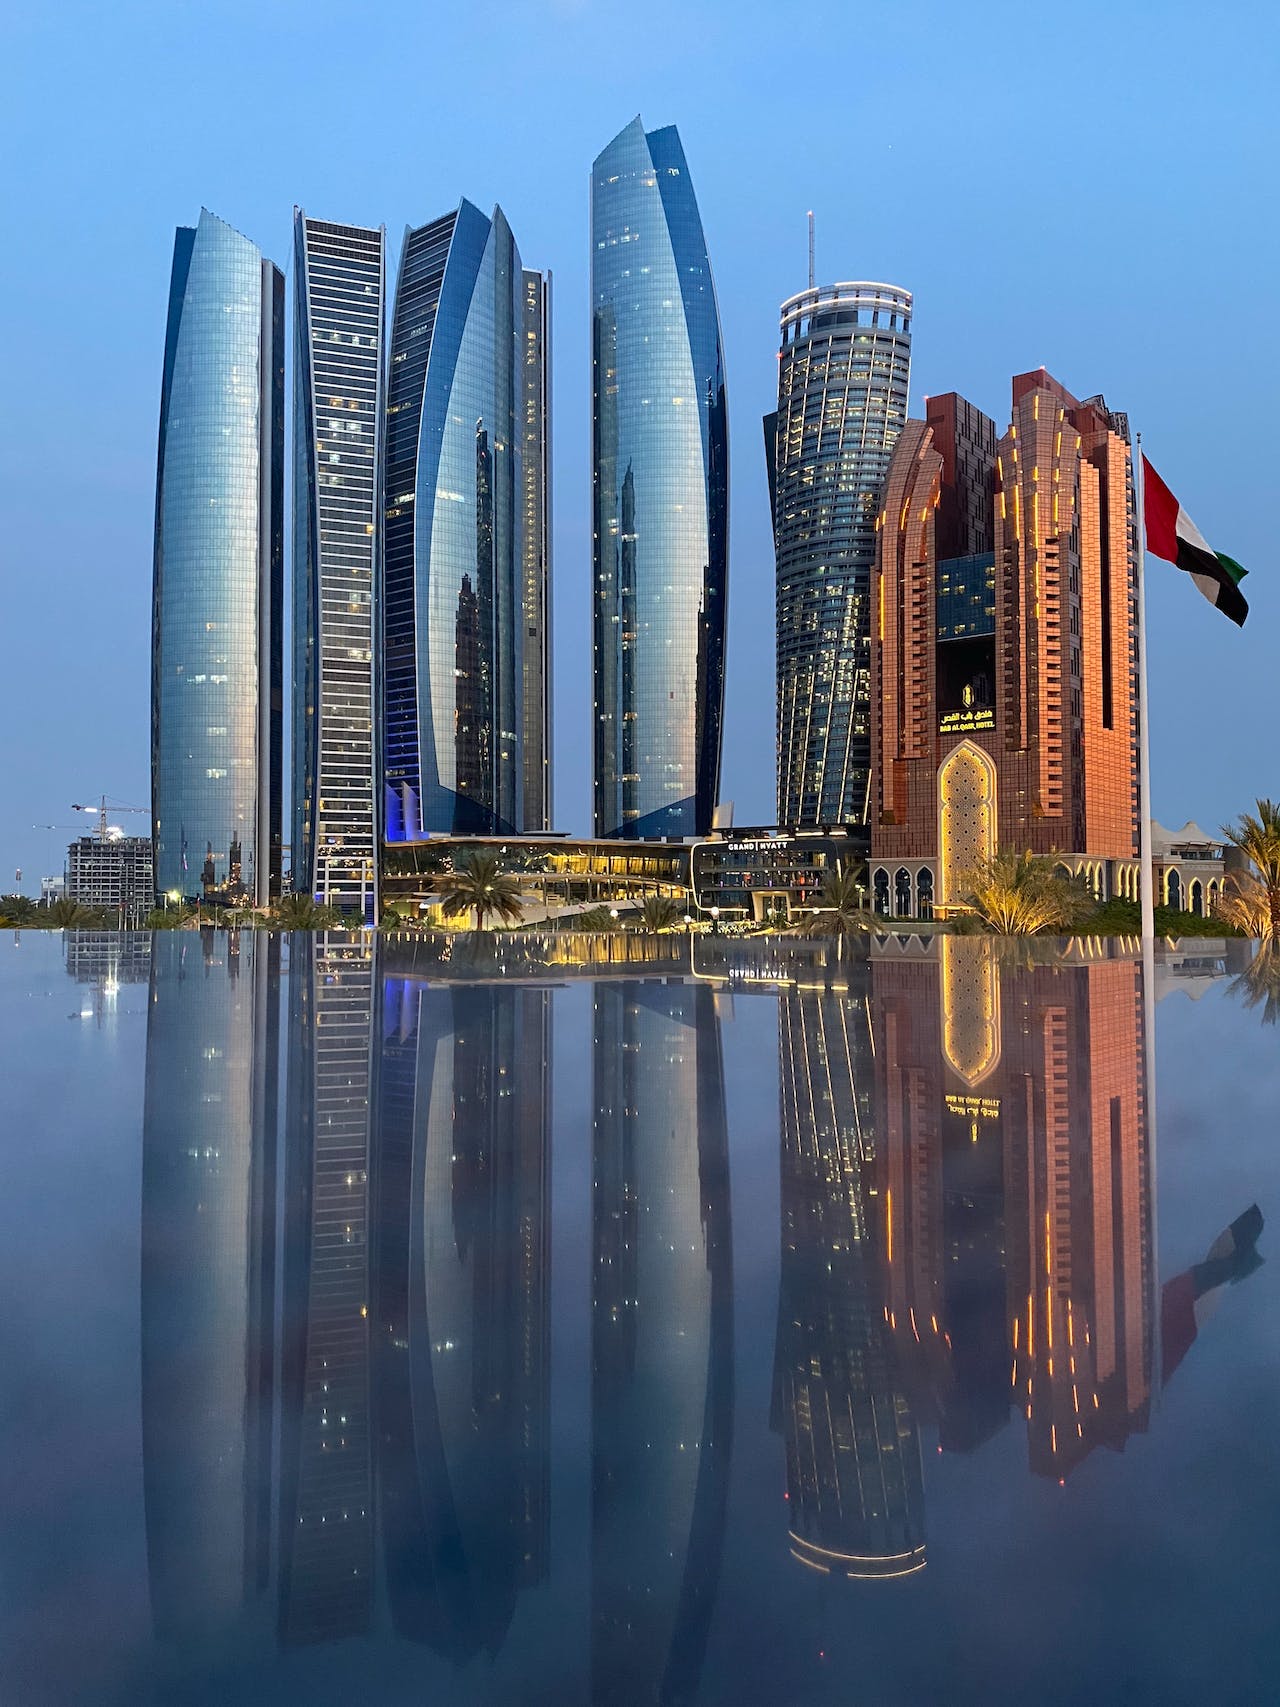 Contemporary skyscrapers placed near water